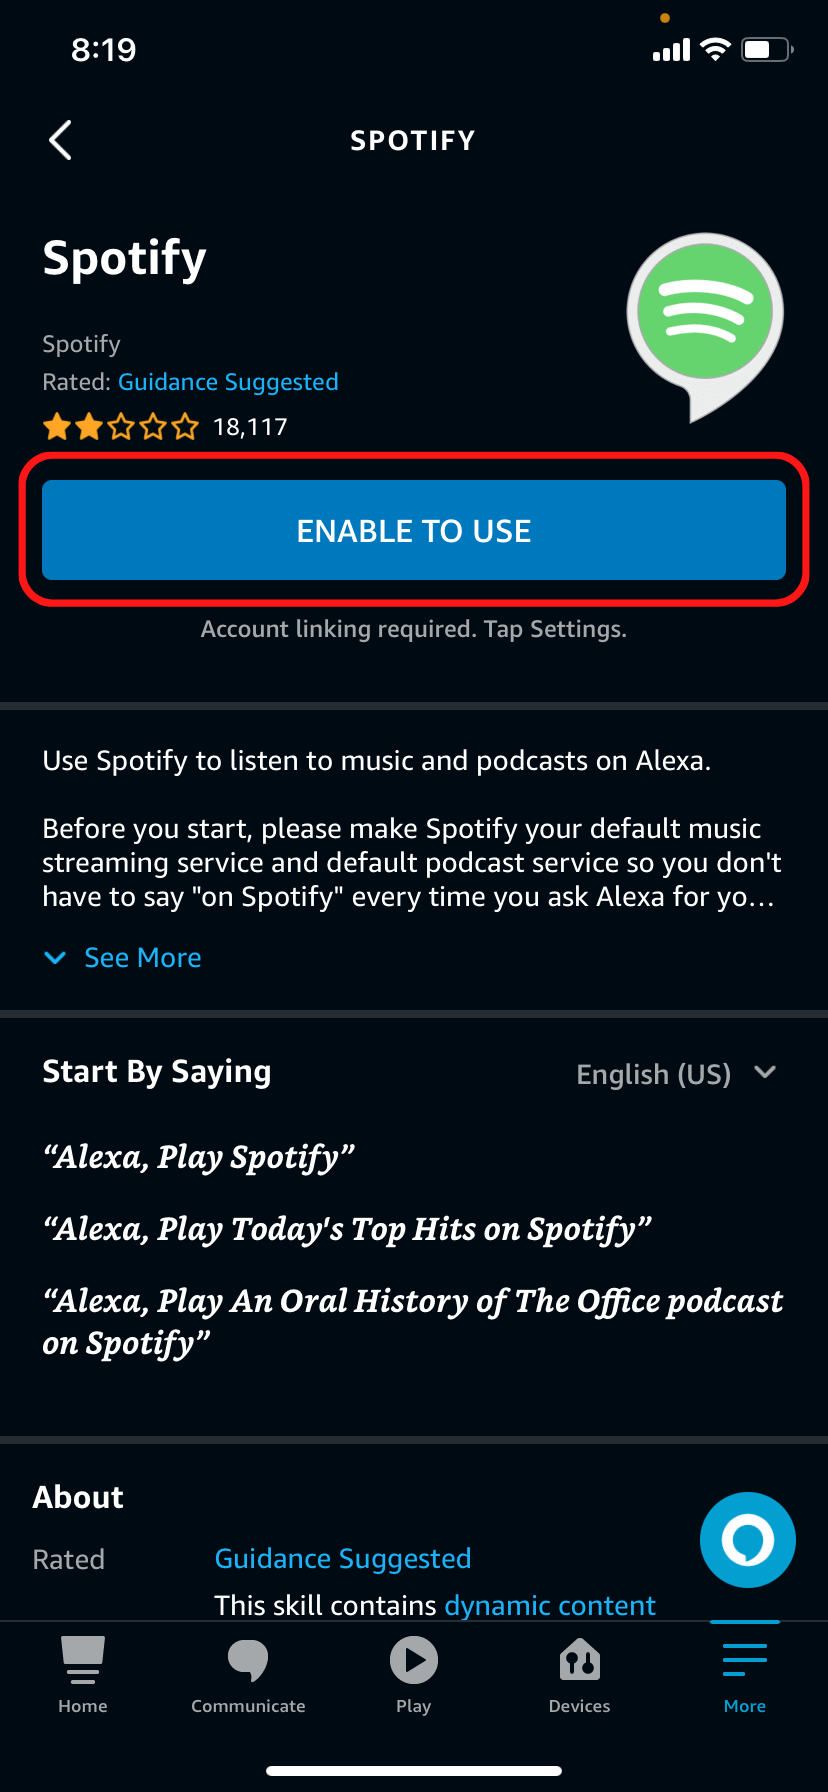 Enabling the Spotify skill in the Alexa app